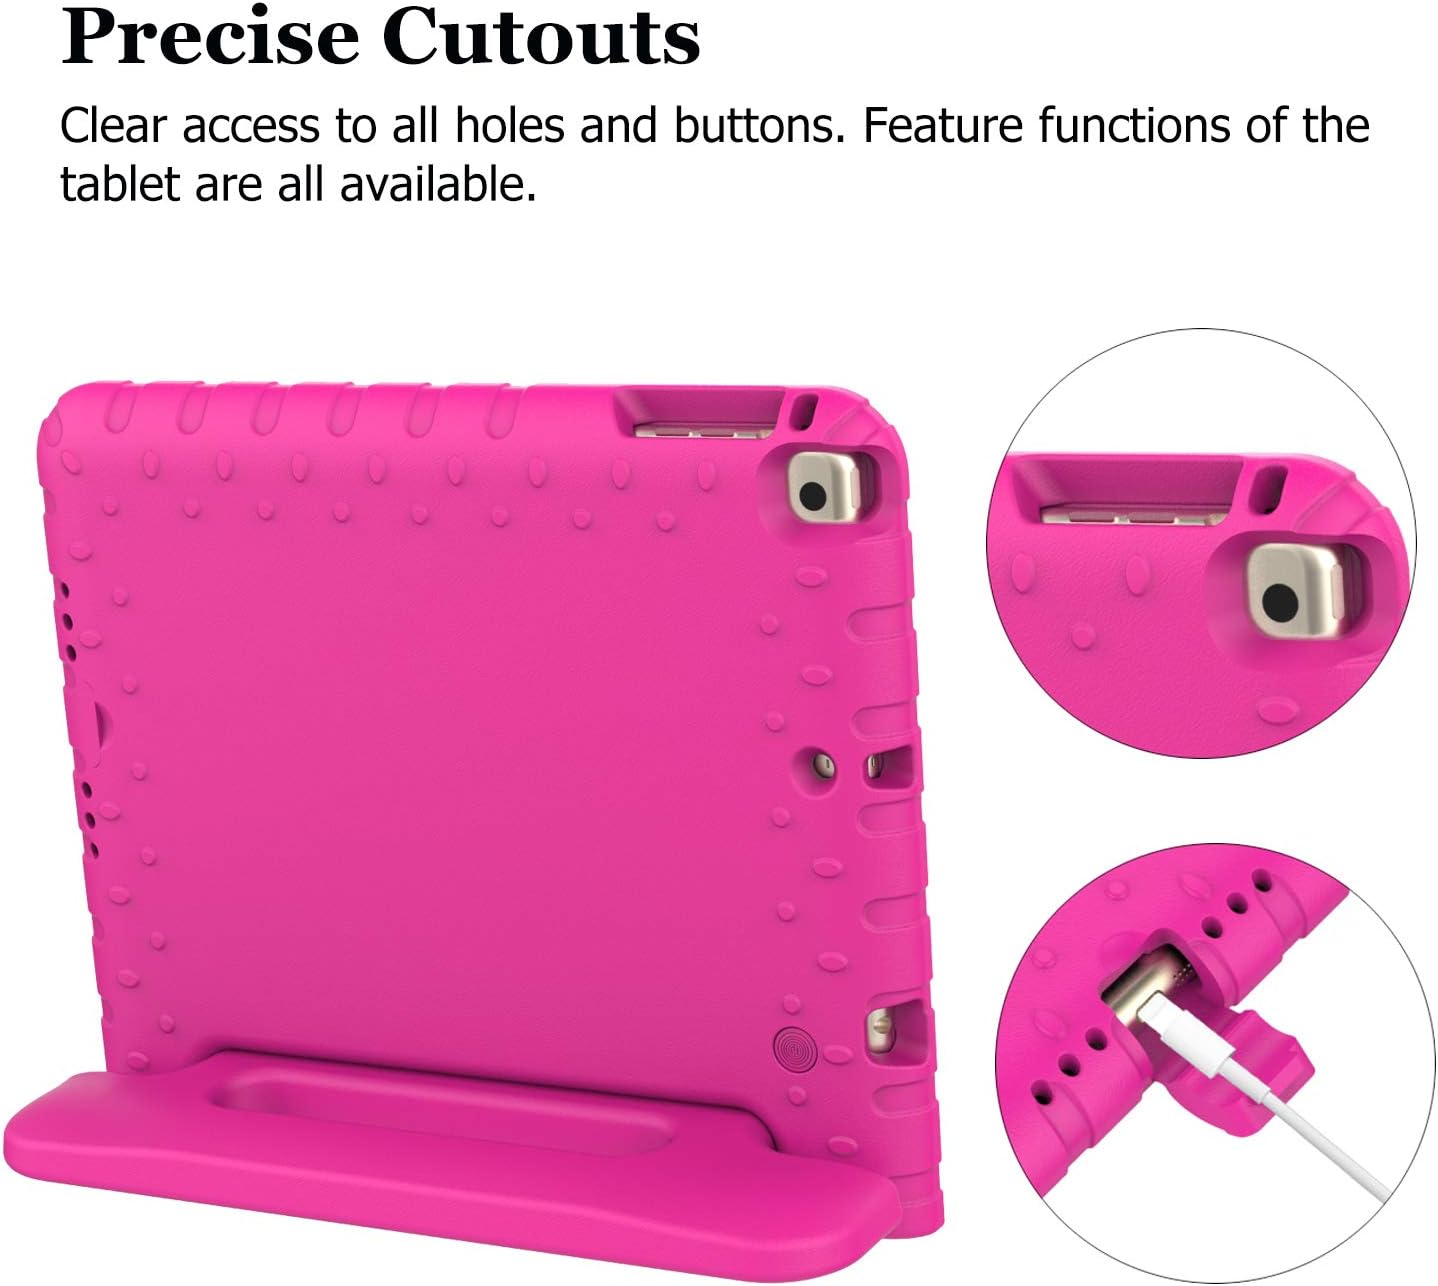 iPad 9.7 inch Shockproof Case w Handle & Stand (Pink) *Free Shipping*